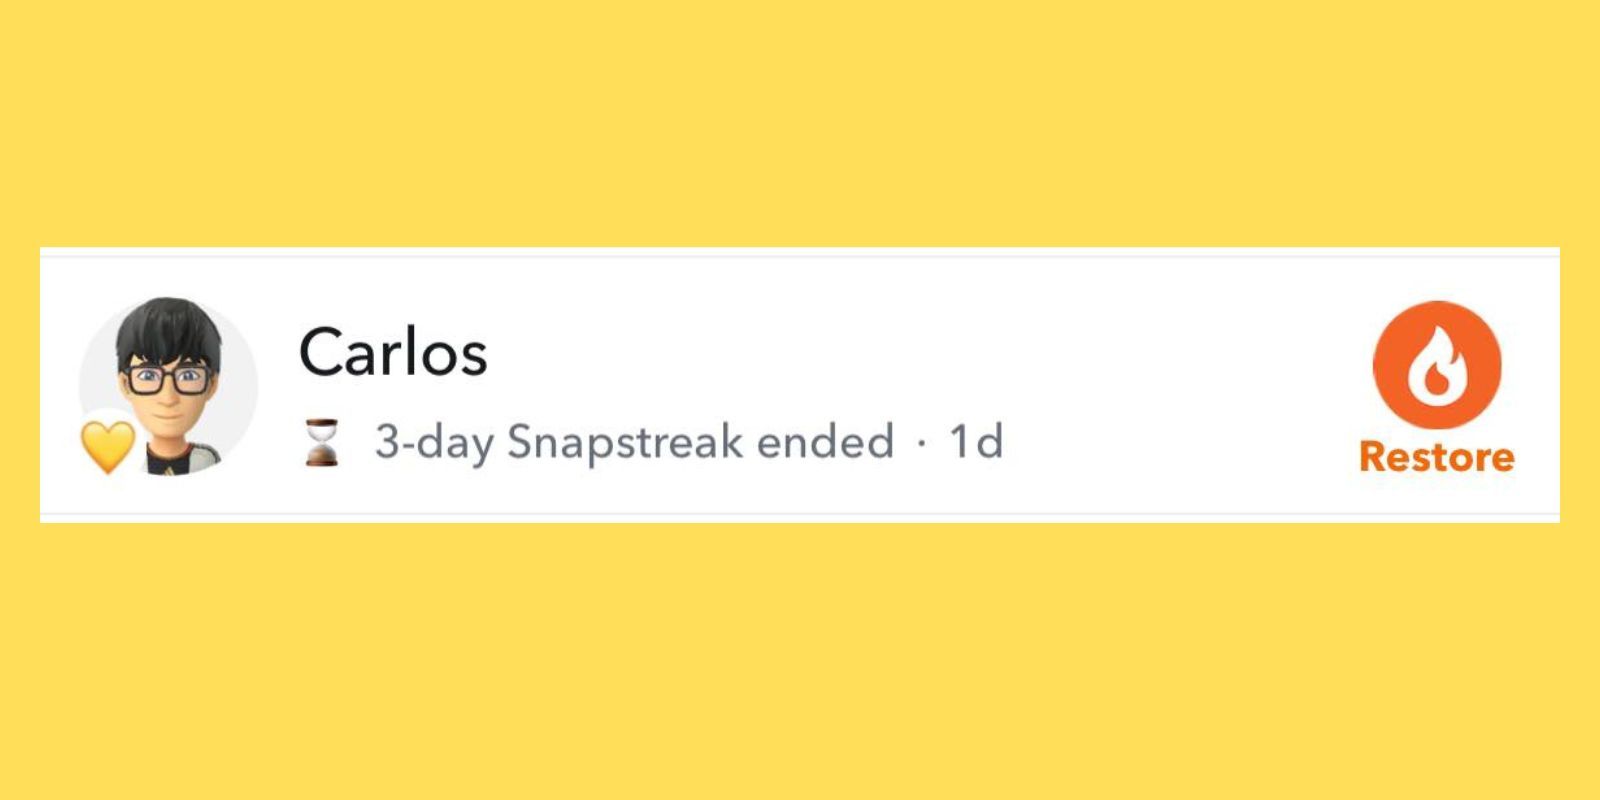 Option to Restore Snapchat Streak That Ended With Carlos